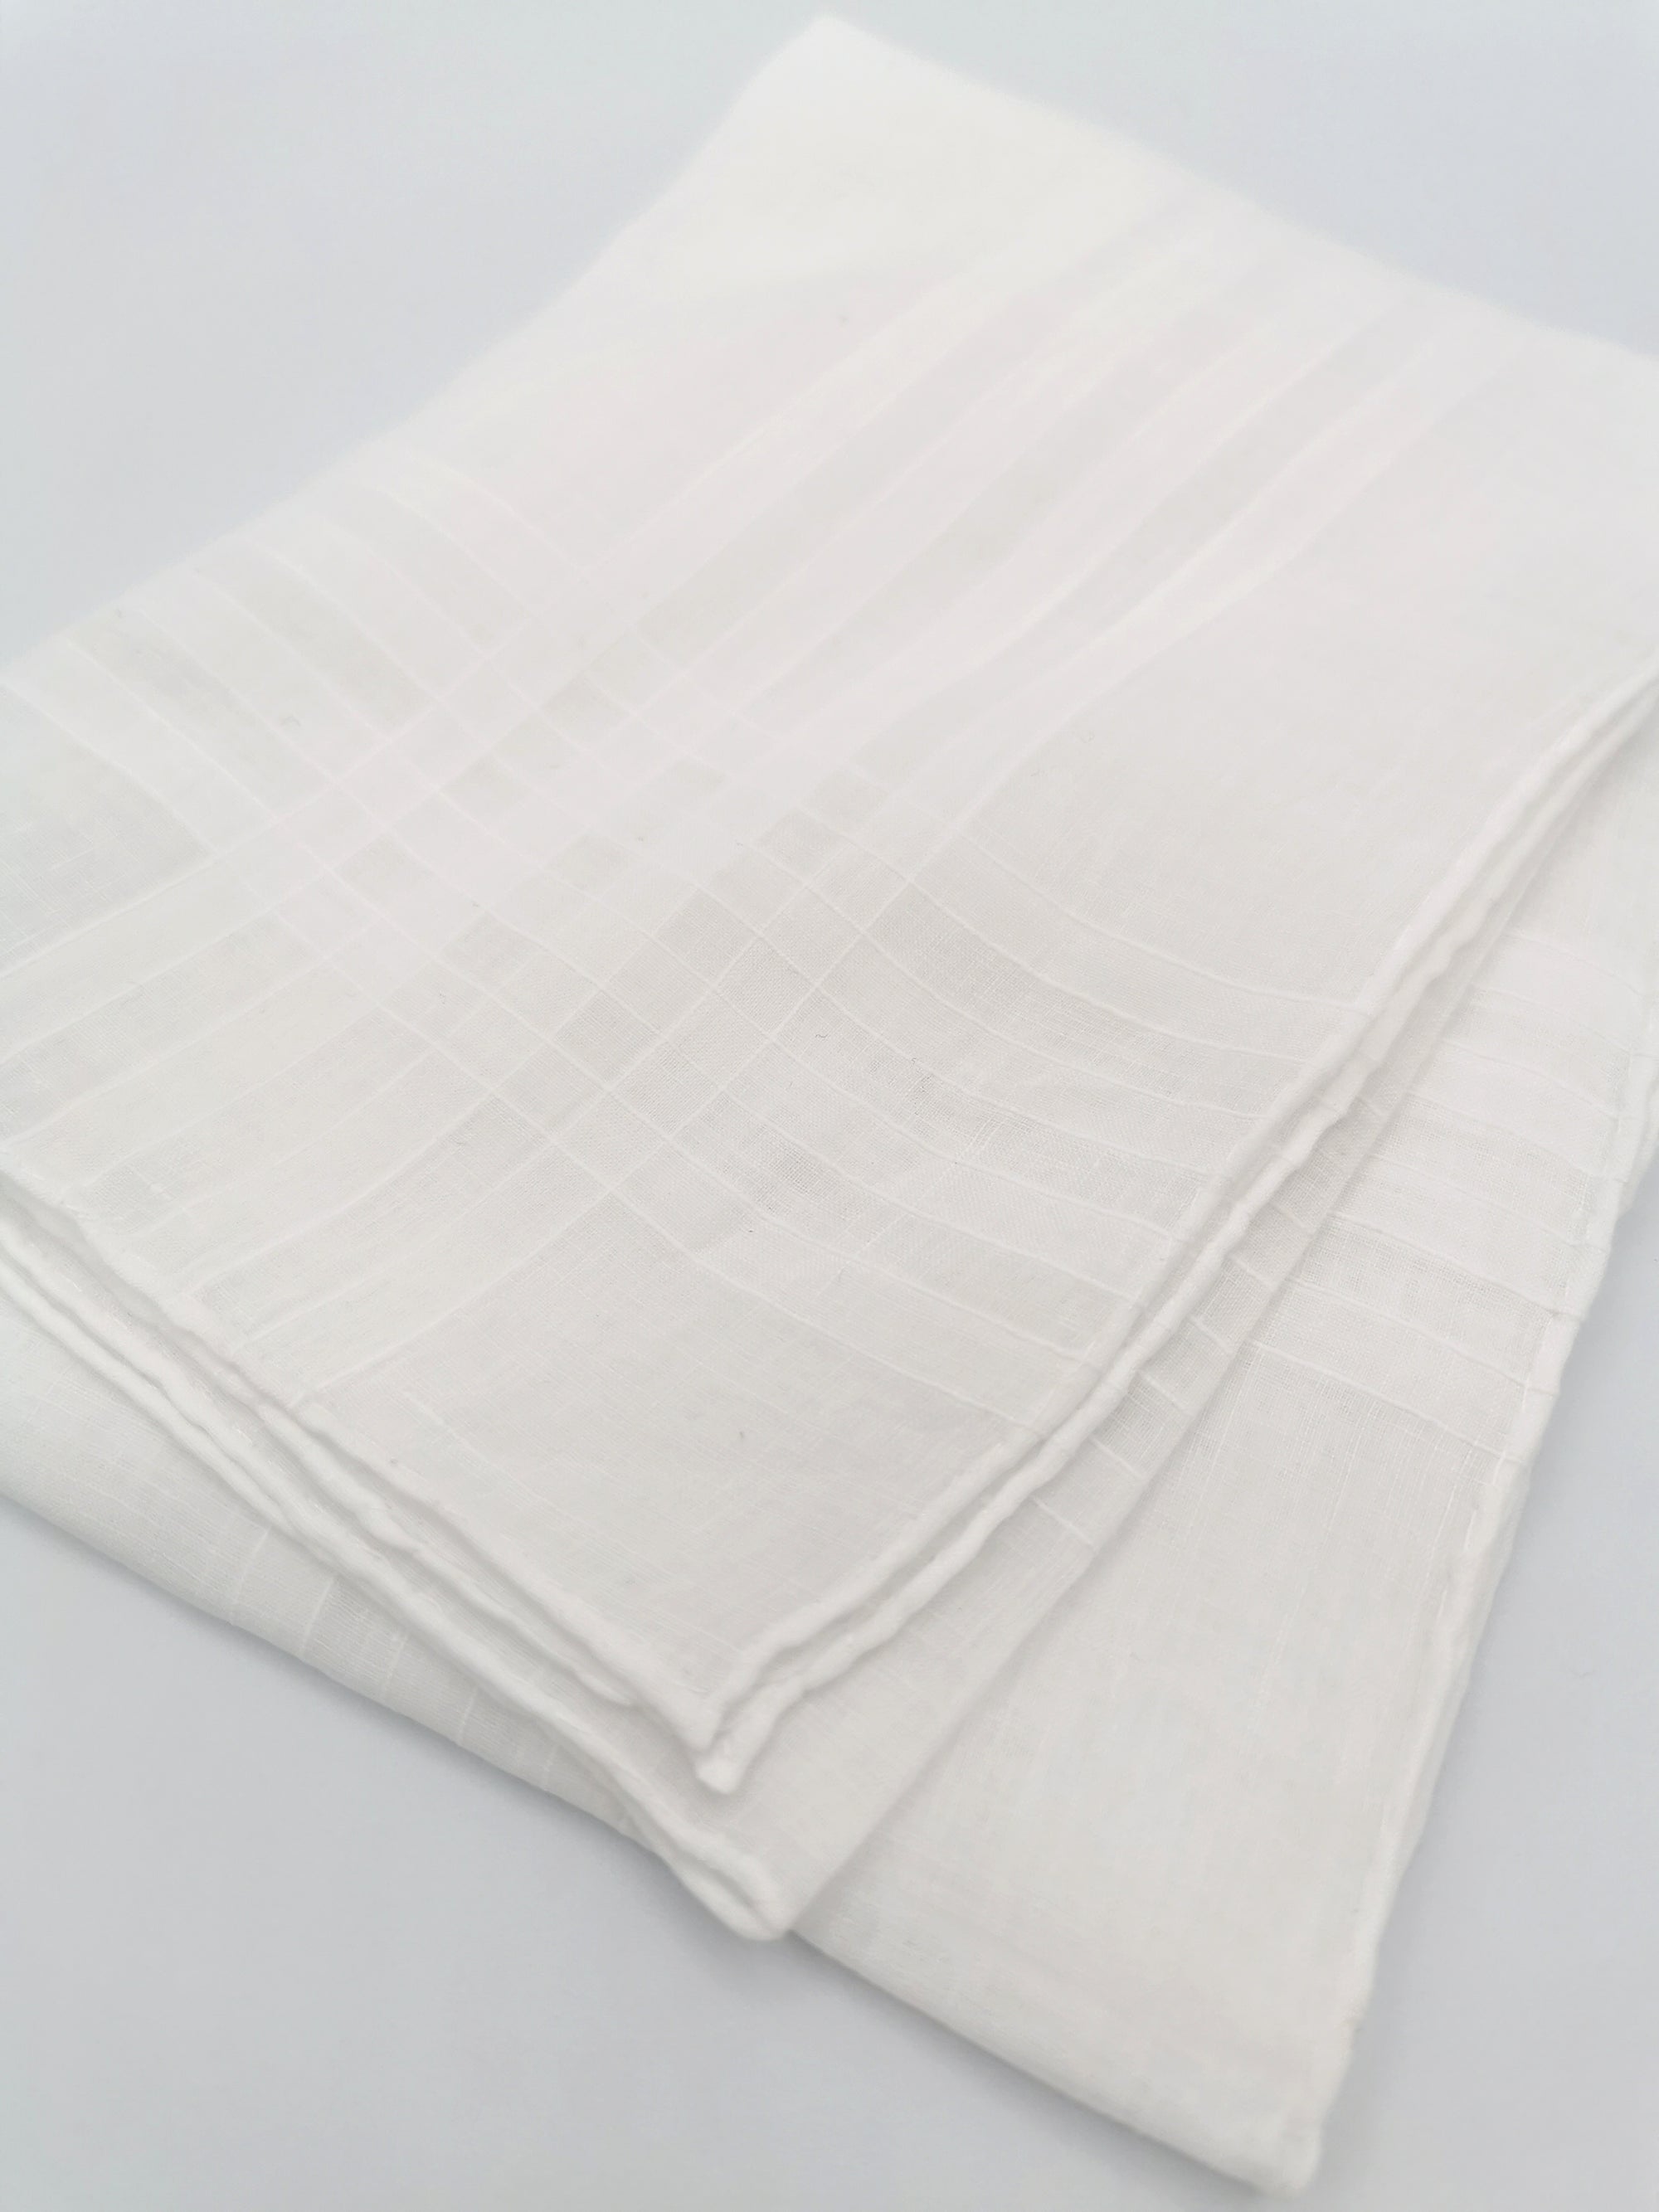 White Simonnot-Godard pocket square with four woven bands on the edges, Archives Collection